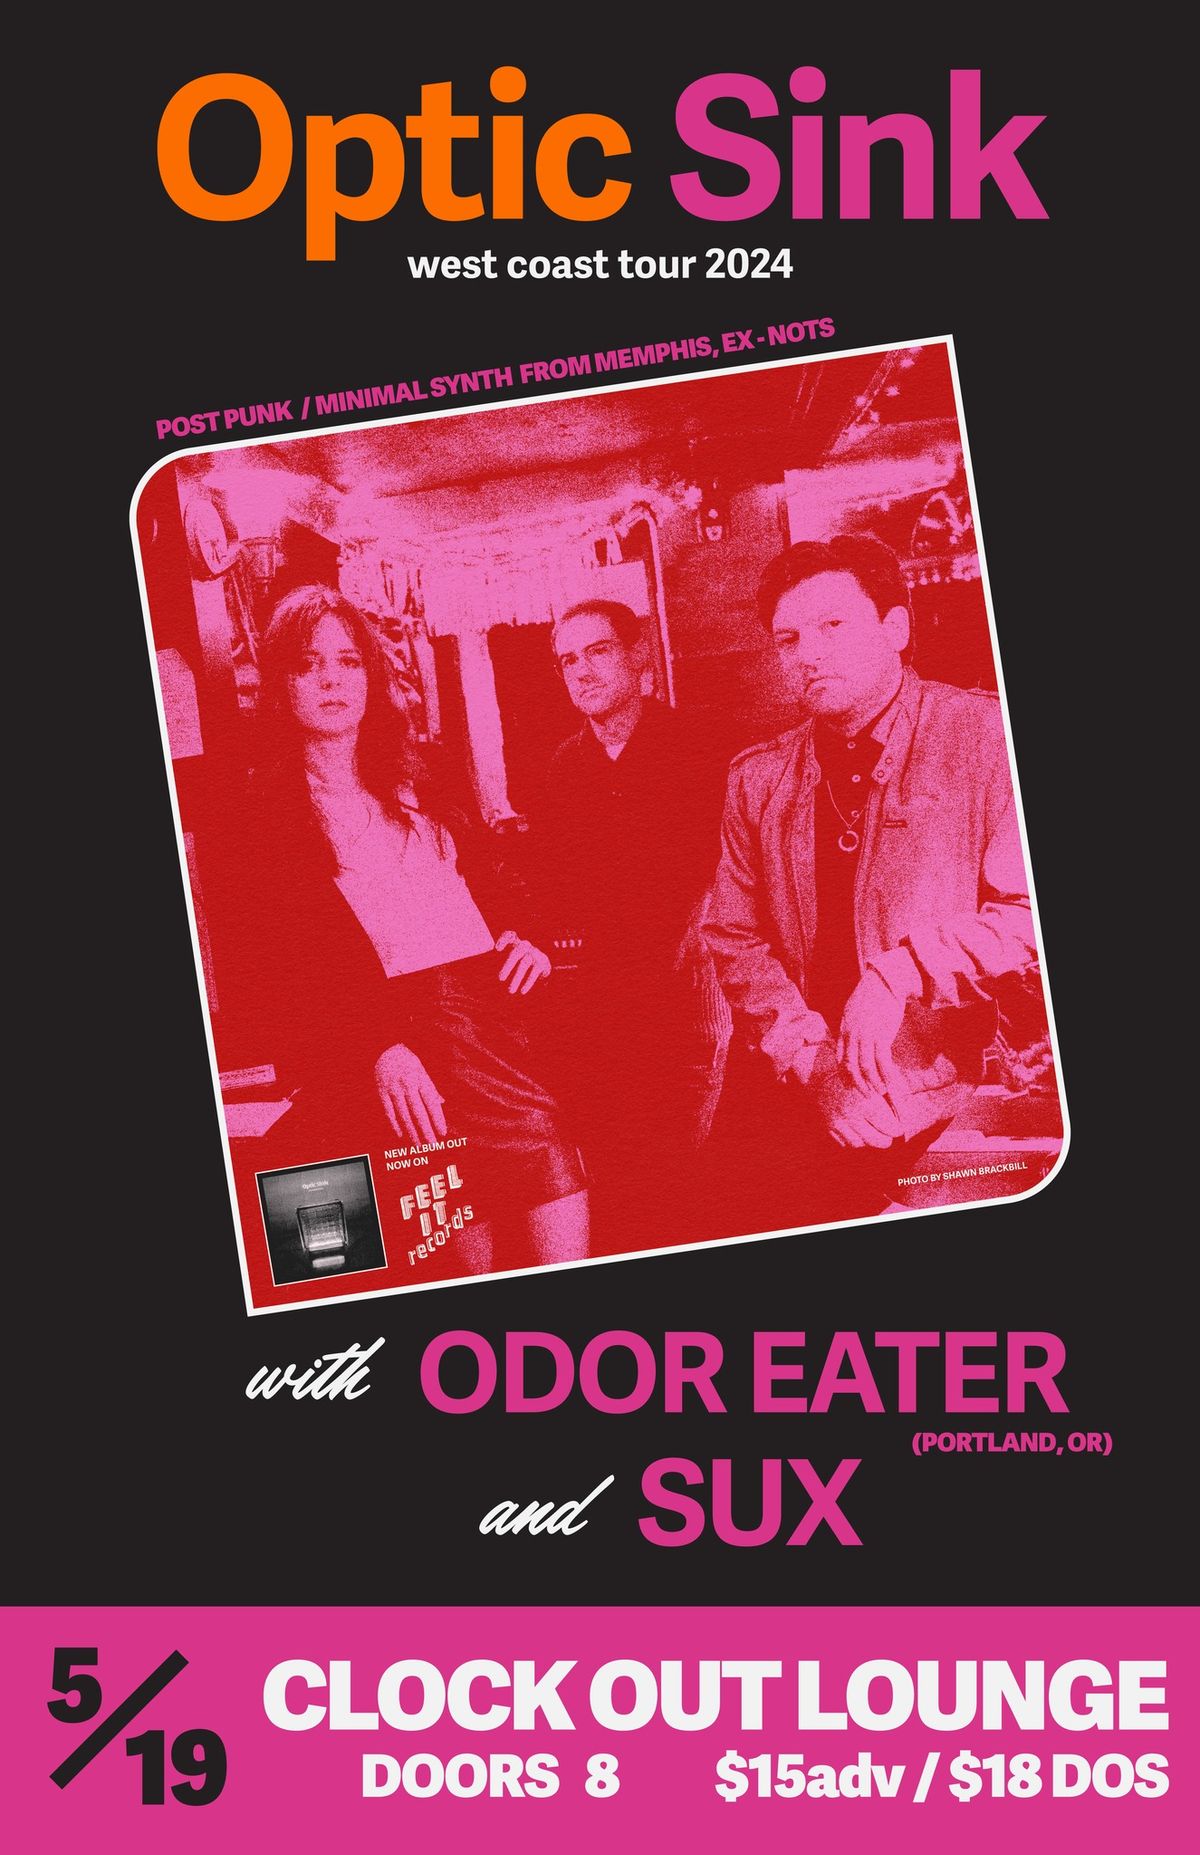 Clock-Out Lounge Presents: Optic Sink (ex NOTS) w\/ Odor Eater, Sux